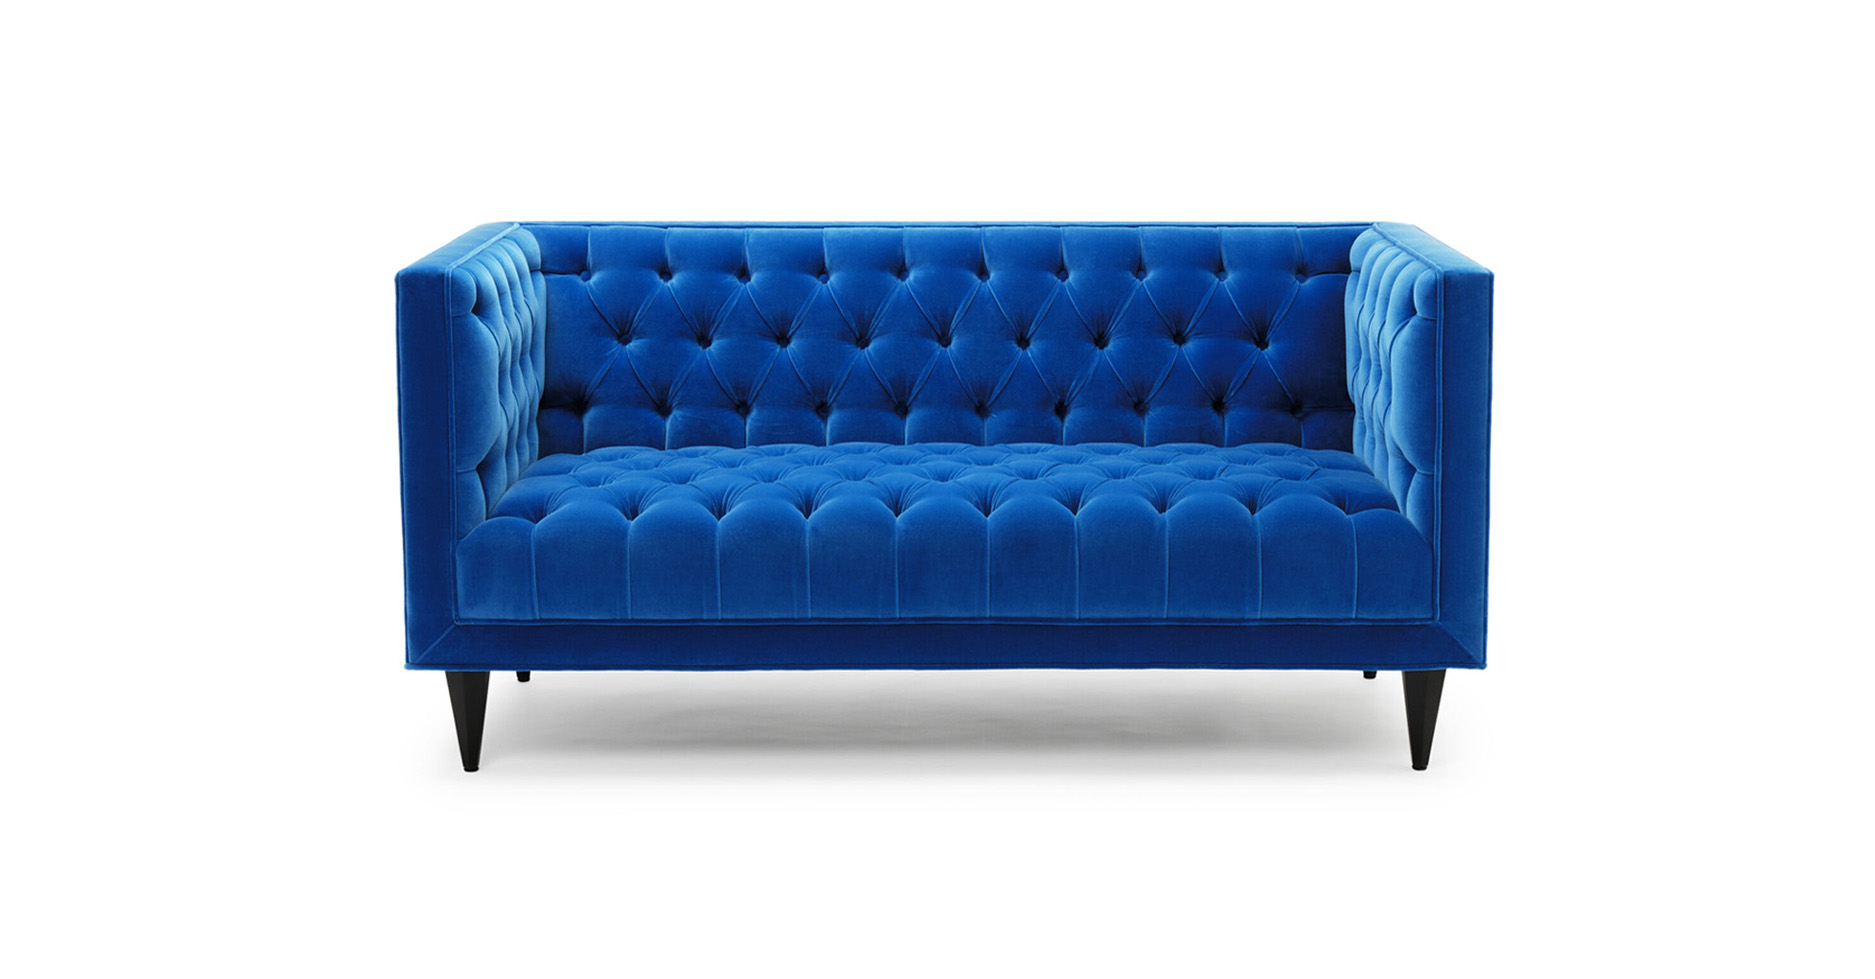 The Tux Sofa - Shown here upholstered in Designers Guild Varese cotton velvet, with legs in black lacquered walnut.